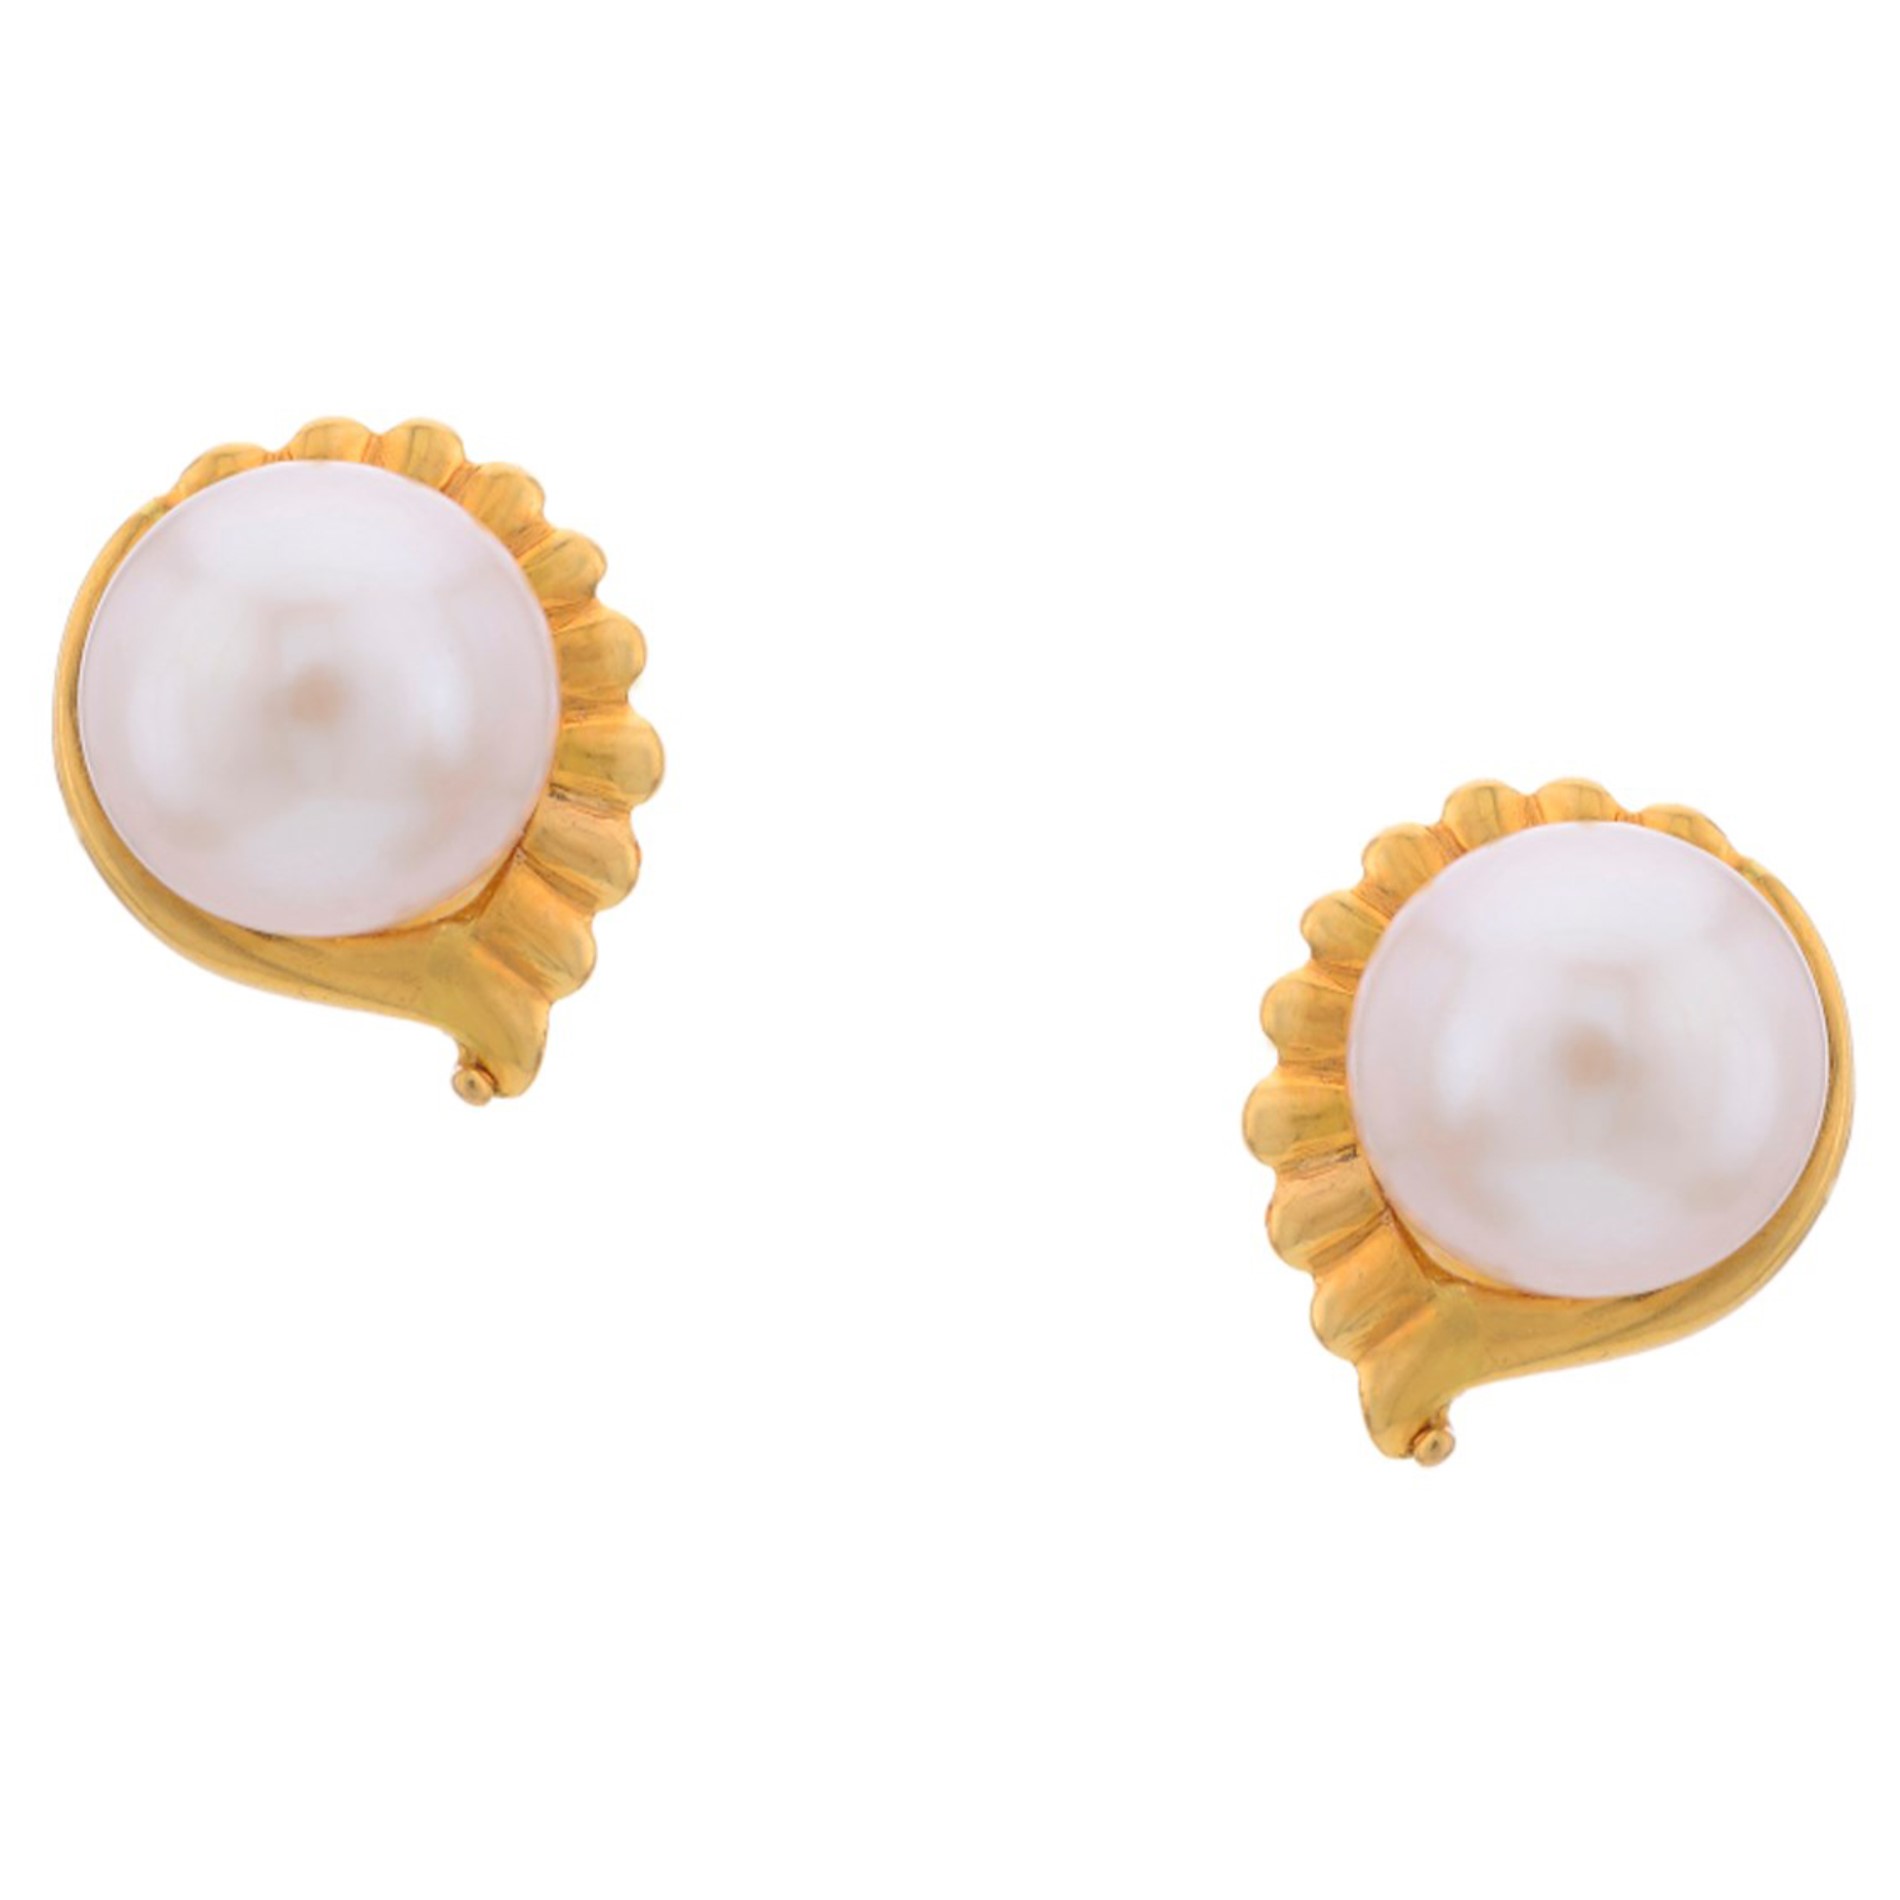 Buy Pearl Conch Studs online